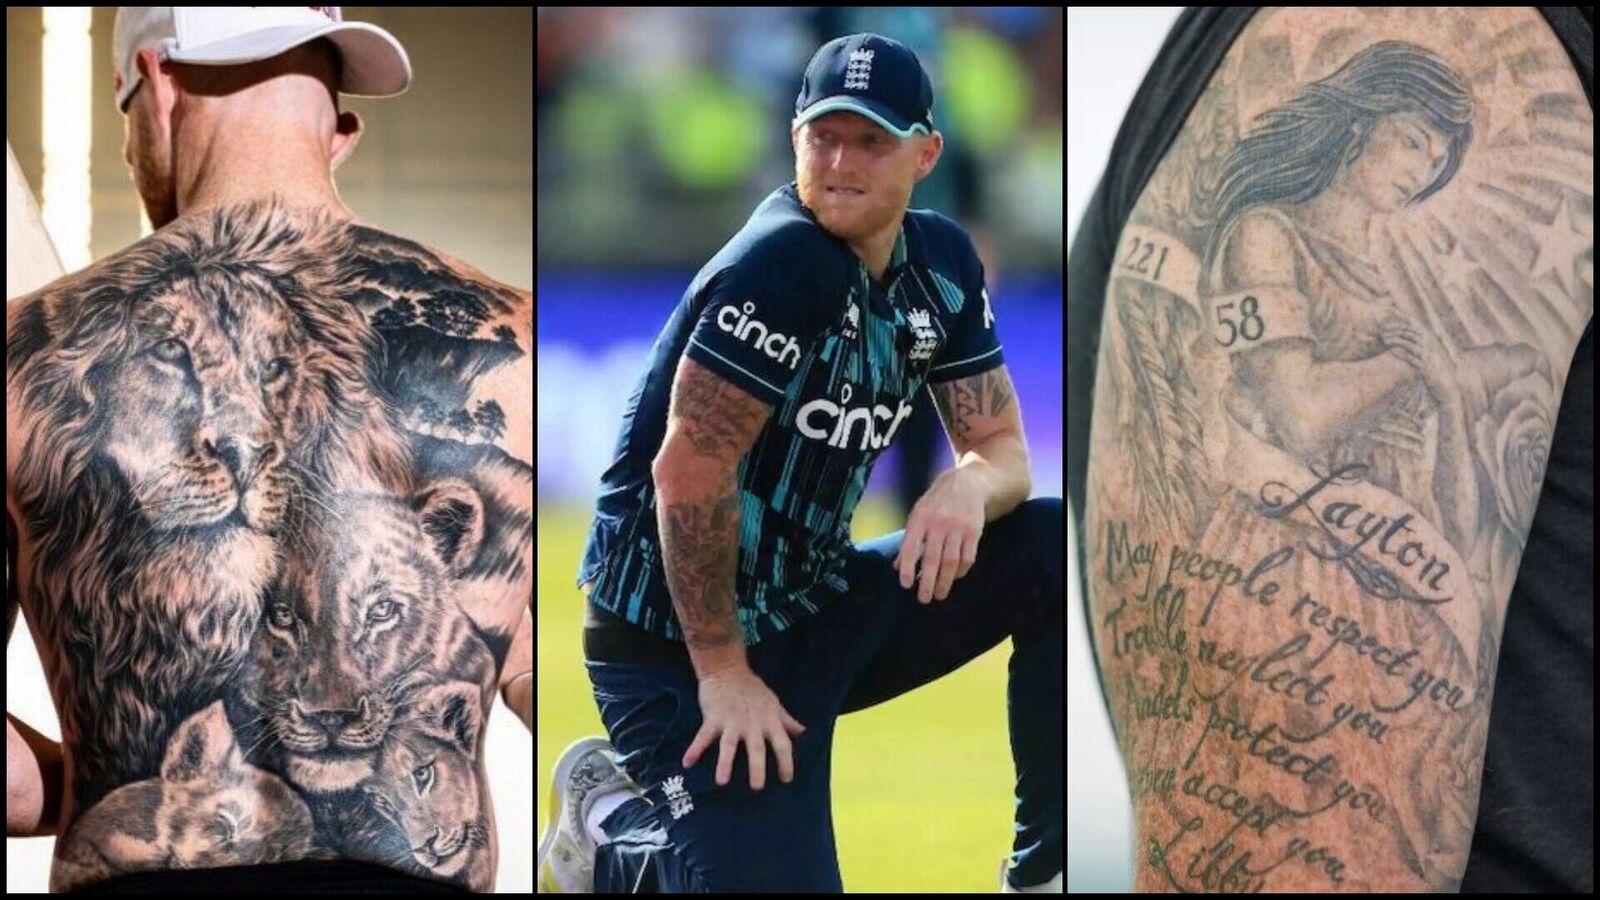 Inked! Cricketers' obsession with tattoos - Rediff.com